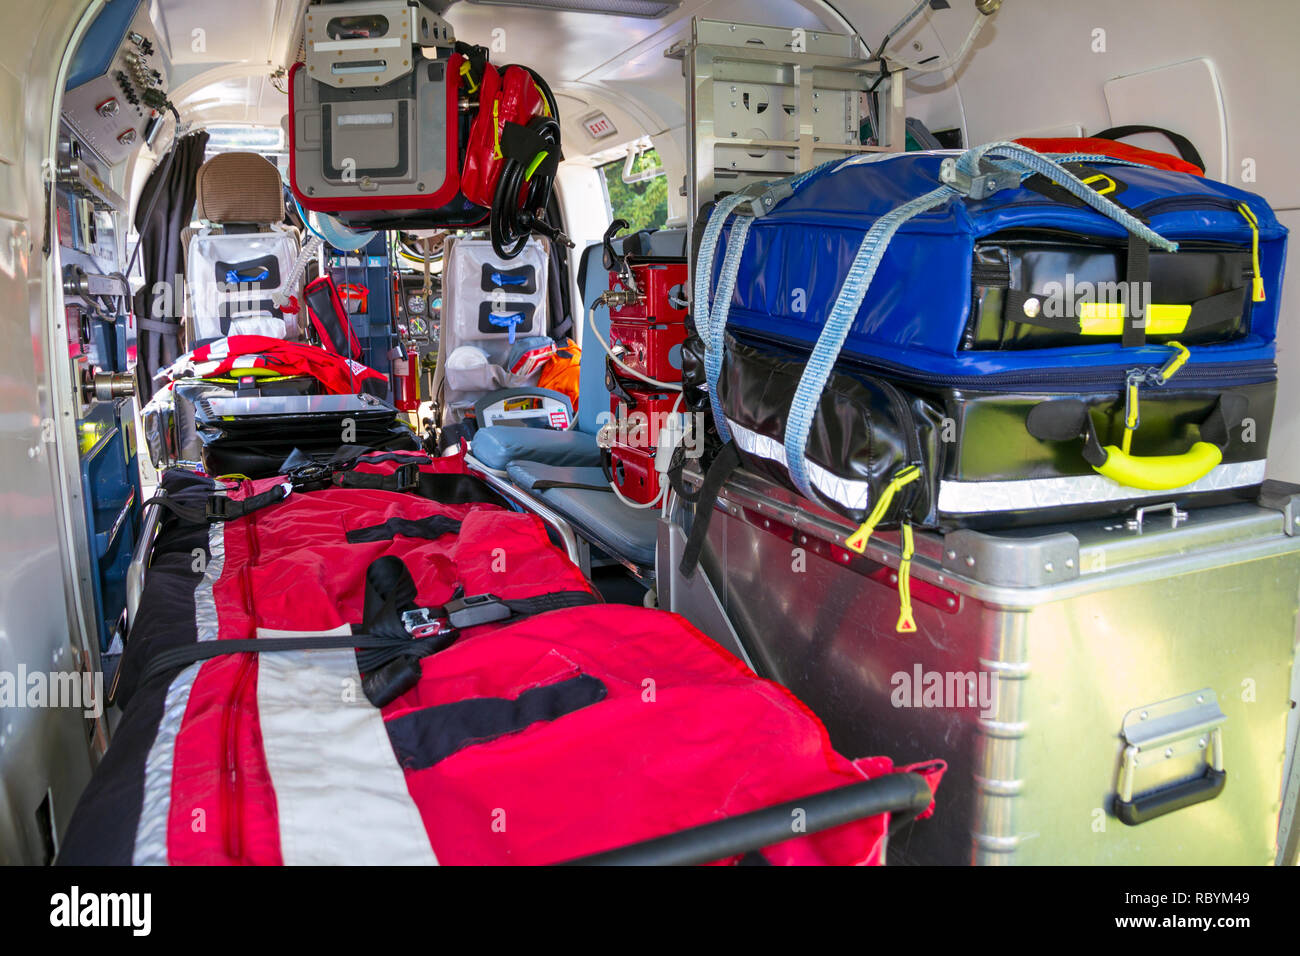 Stretcher and medical equipment in a Emergency medical services helicopter. Stock Photo